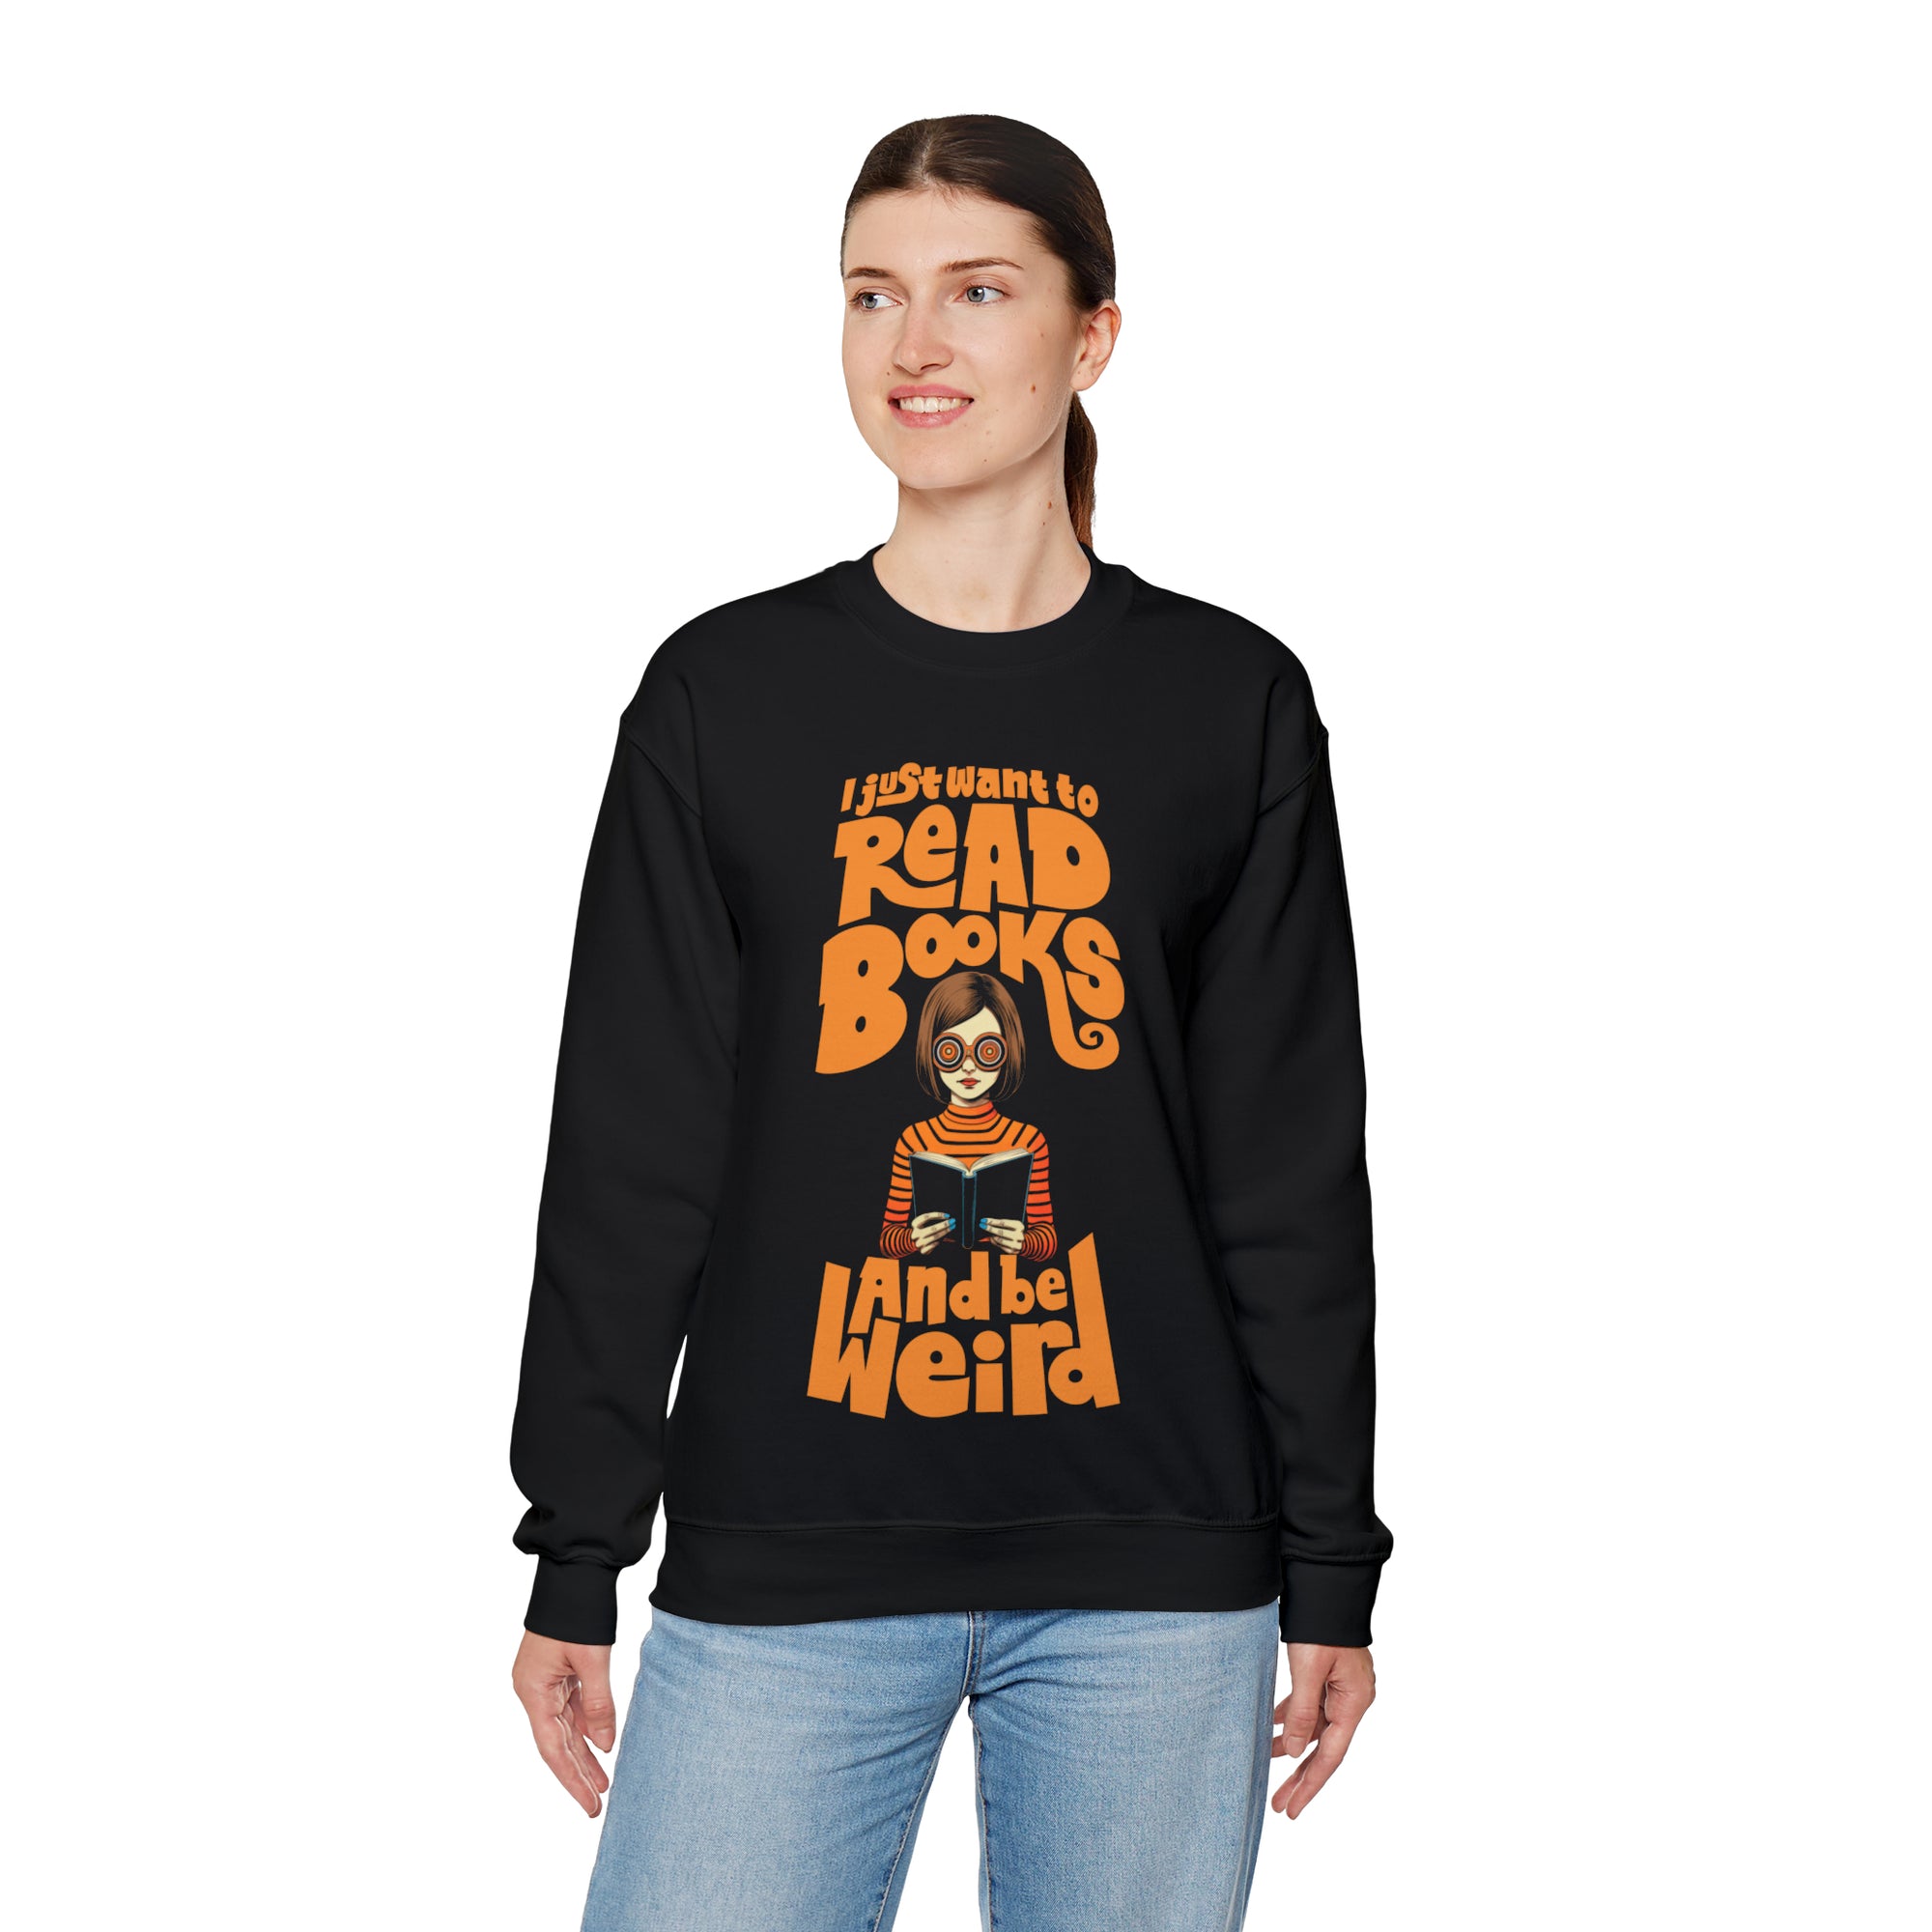 I Just Want To Read Books and Be Weird Crewneck Sweatshirt